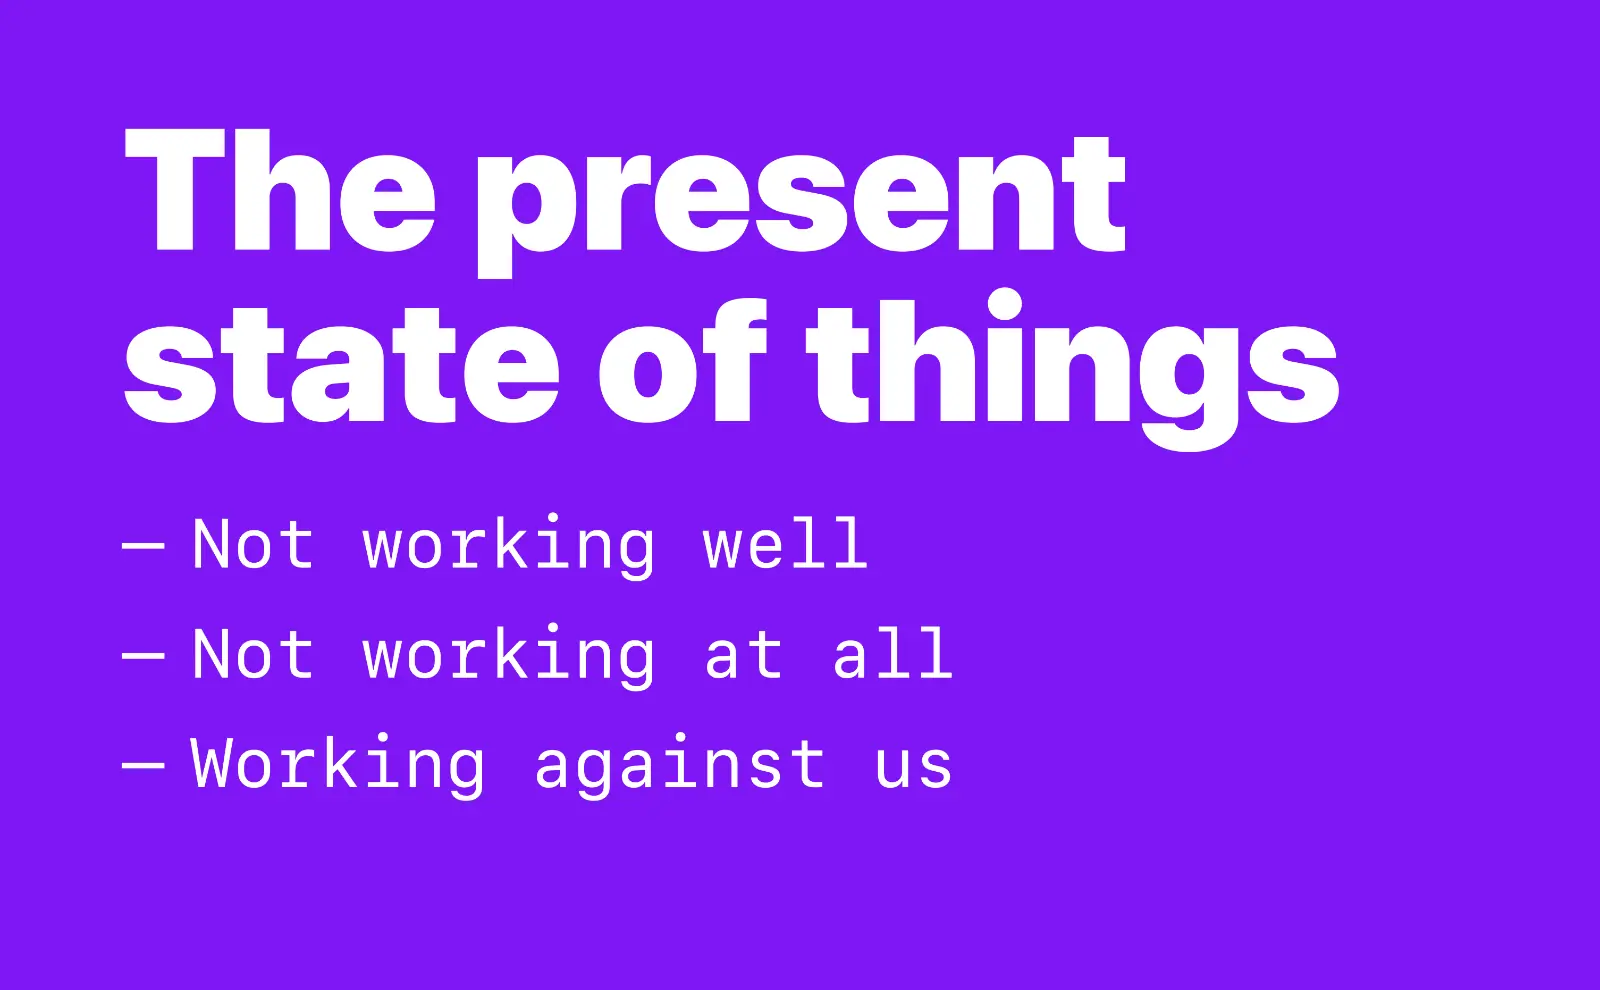 The present state of things: Not working well, Not working at all, Working against us